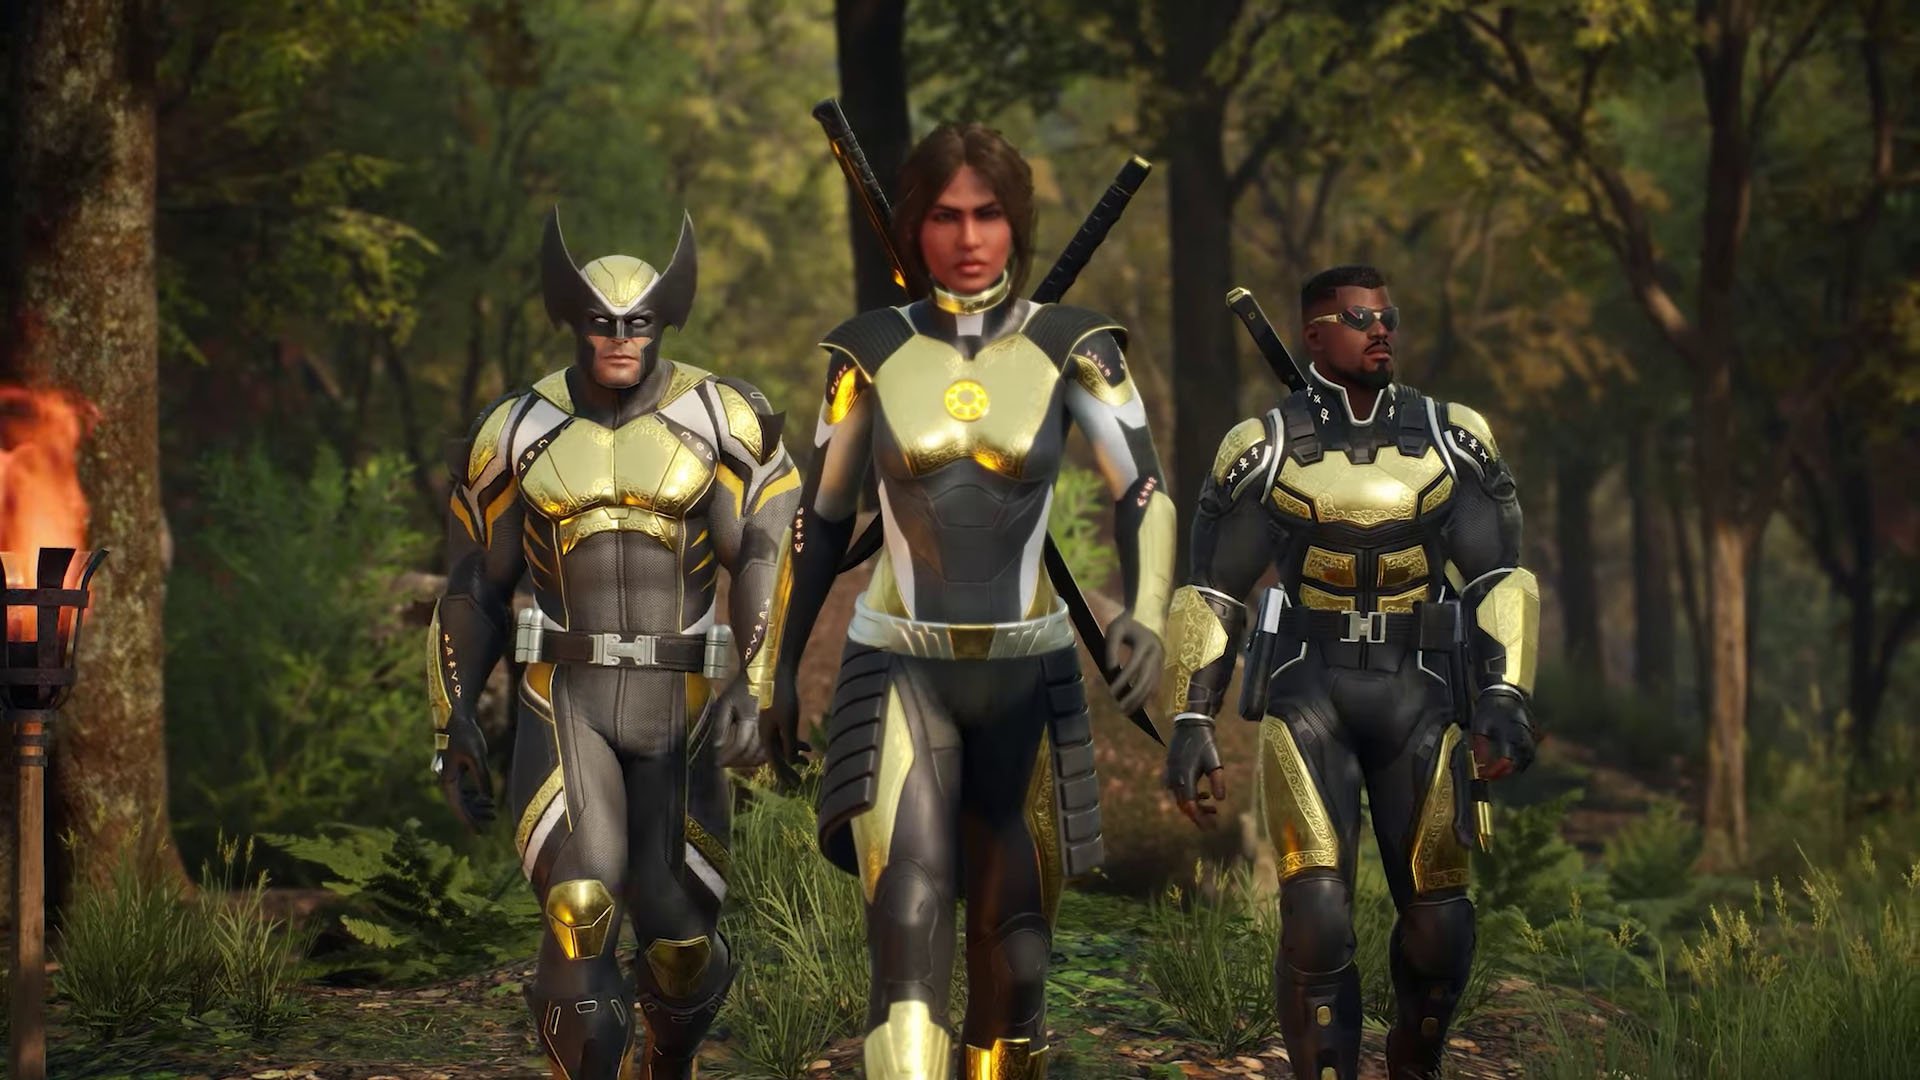 # Marvel’s Midnight Suns ‘Combat Overview’ trailer